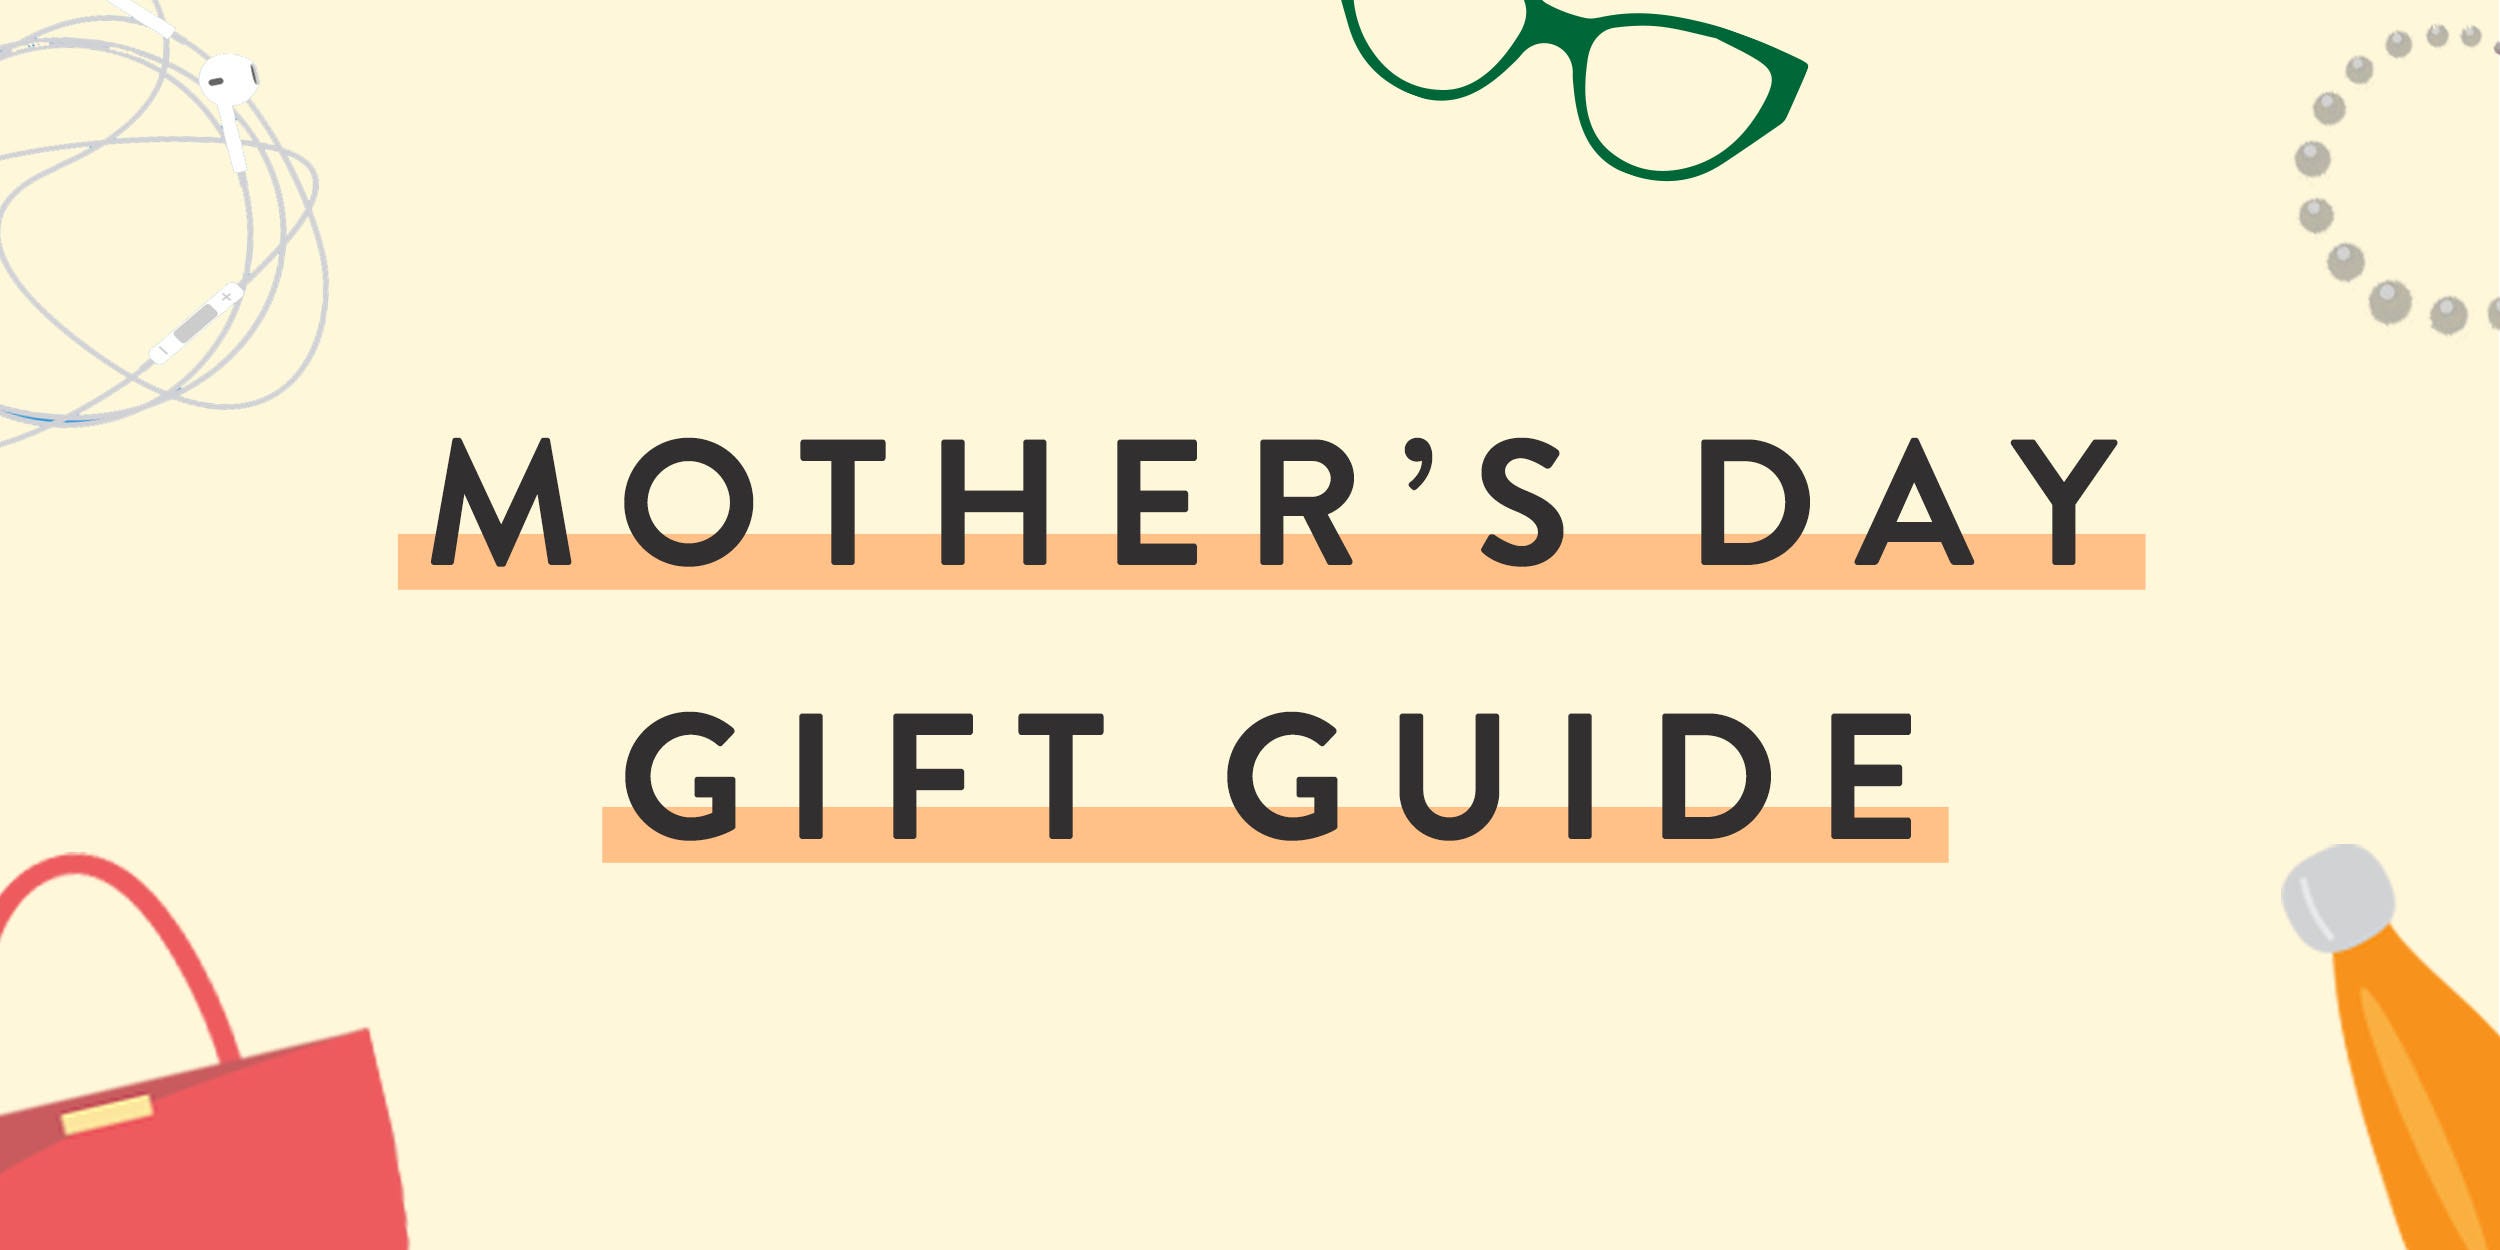 10 Perfect Gifts for the Moms in Your Life - Think Dirty® Shop Clean.